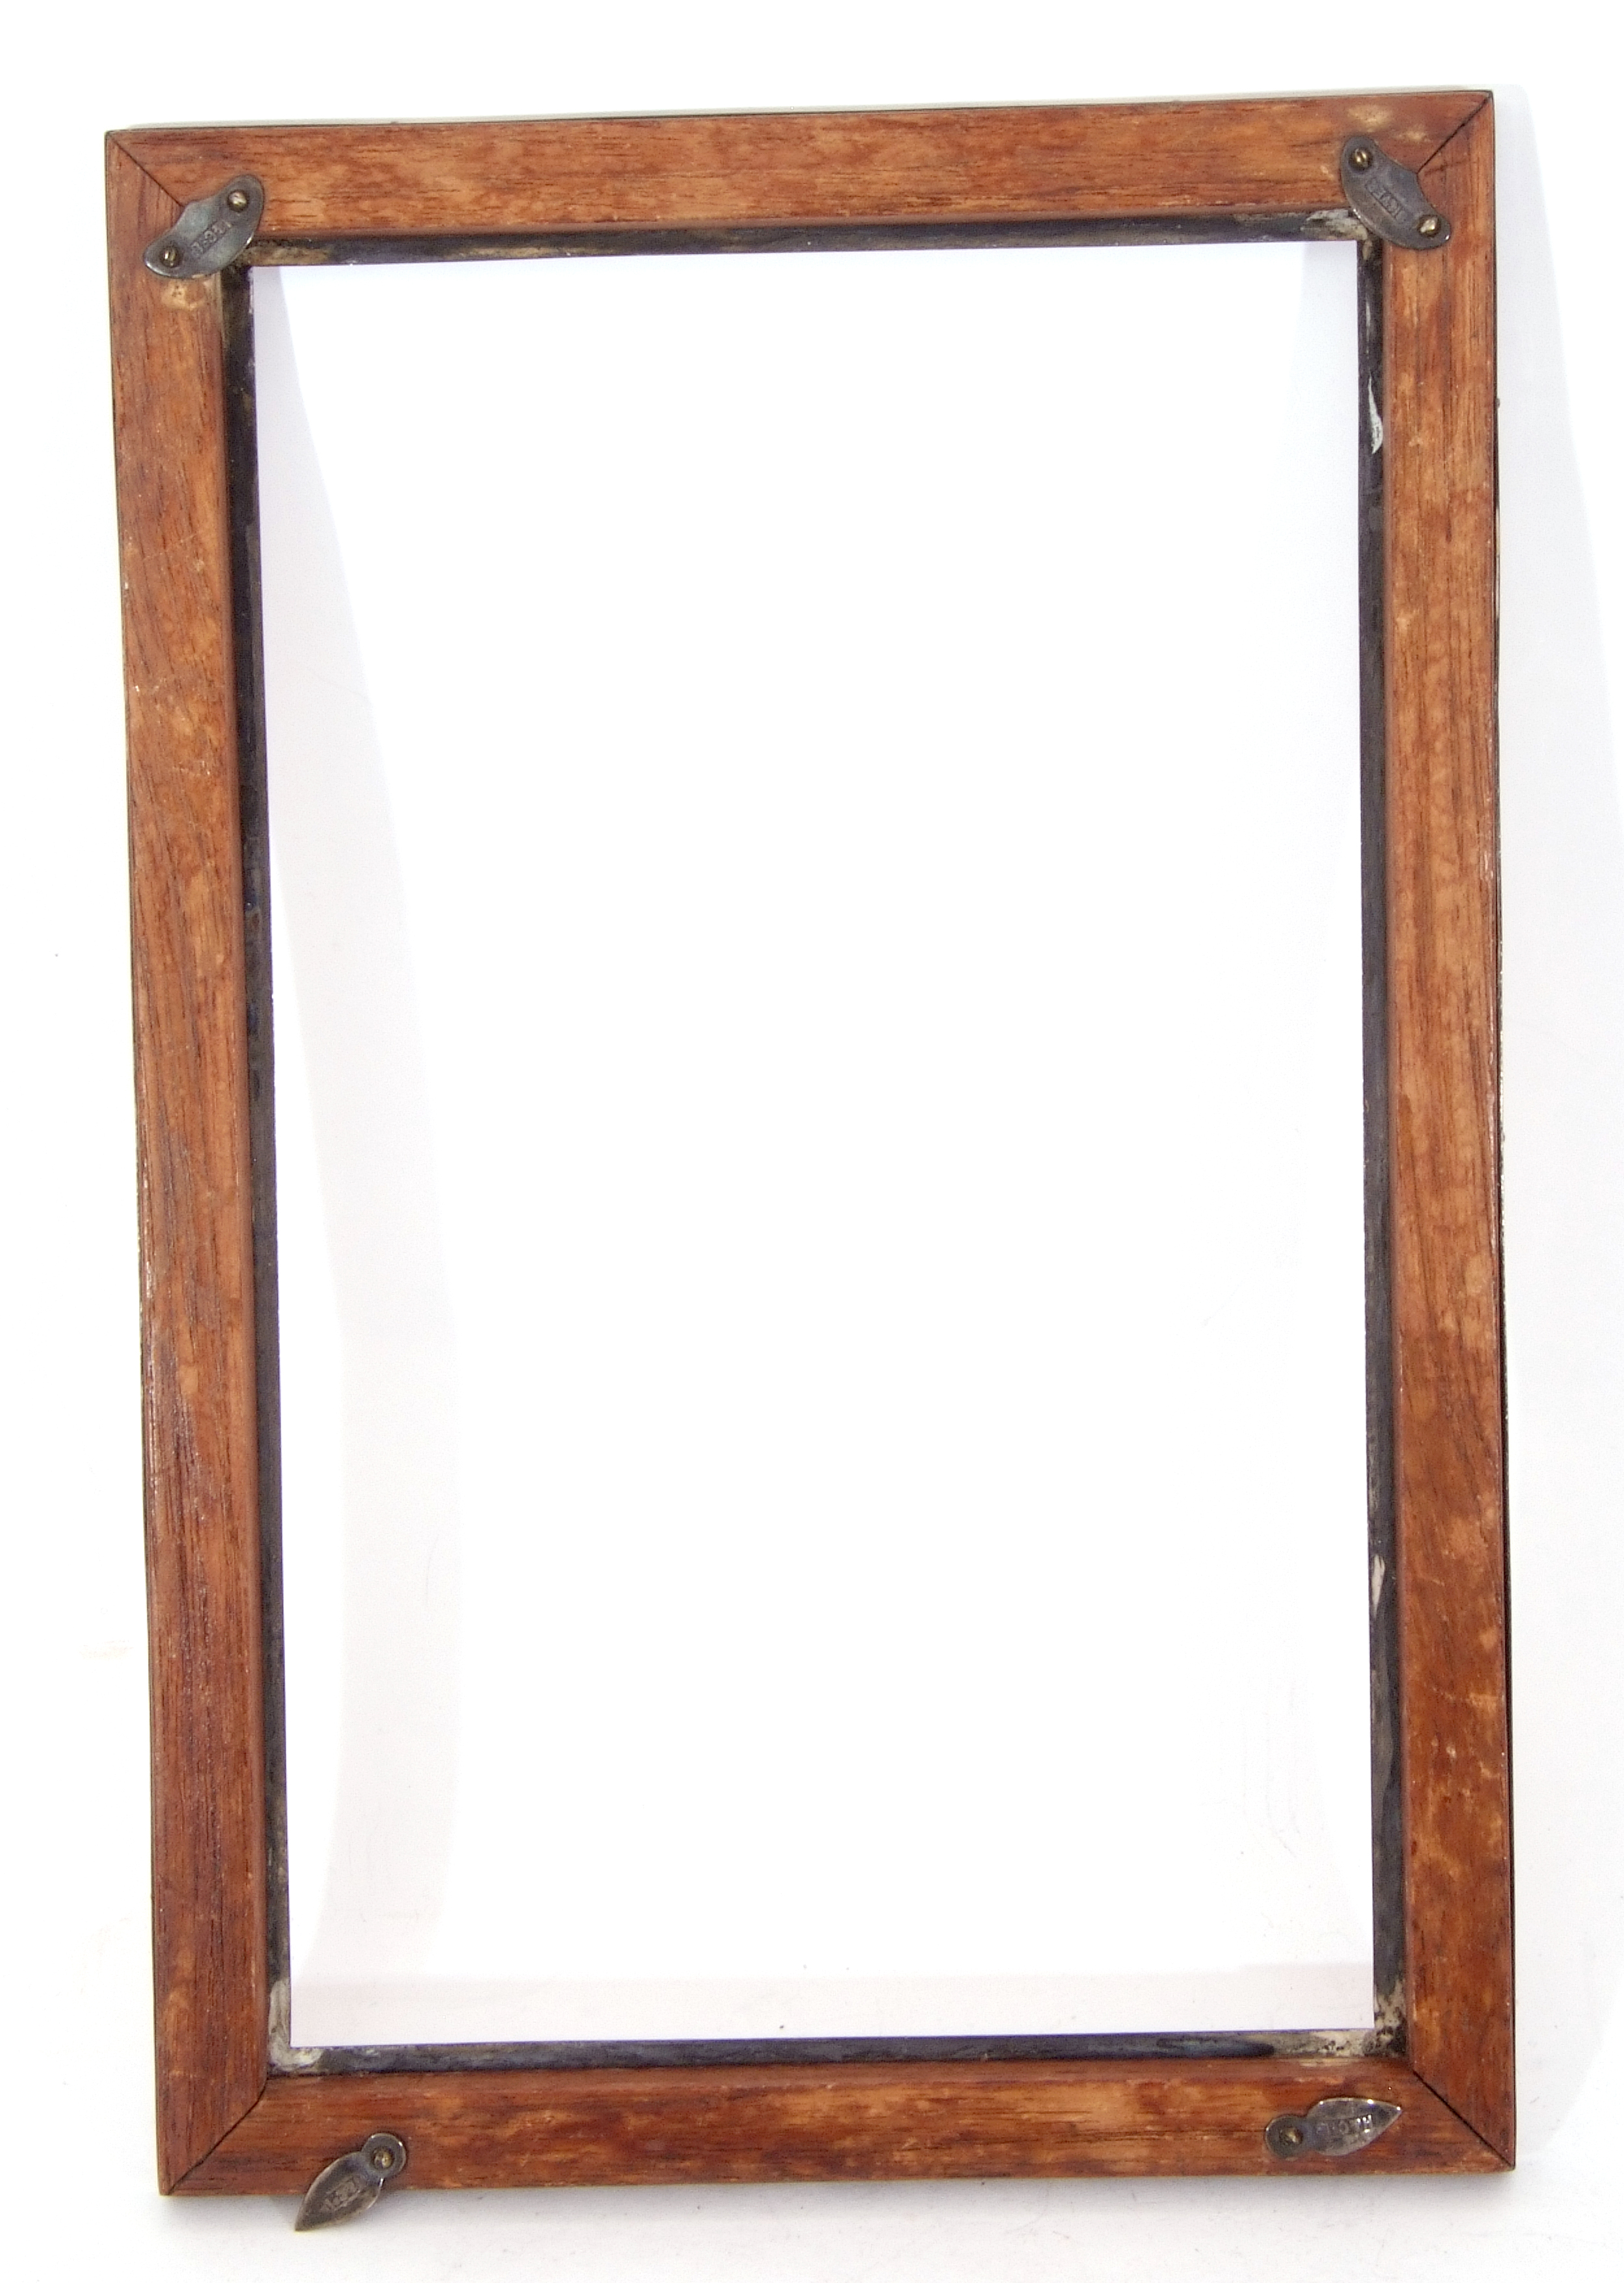 Early 20th century Hamilton & Co Calcutta photograph frame of plain polished rectangular form, outer - Image 3 of 3